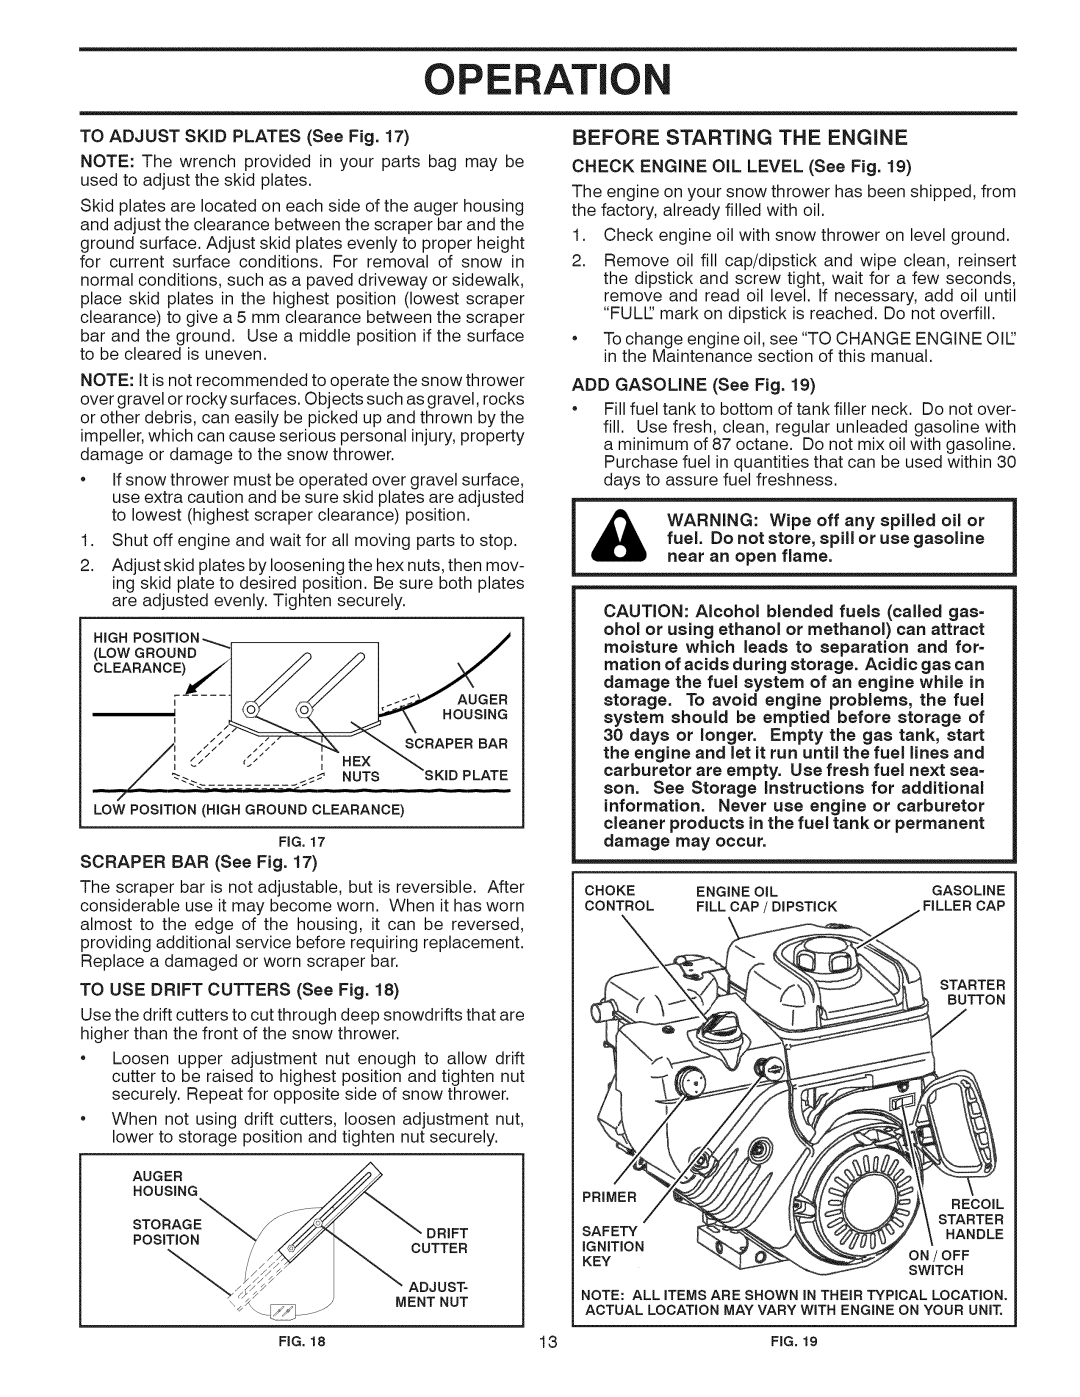 Craftsman 917.881064 owner manual Operati, Before Starting The Engine, TO ADJUST SKID PLATES See Fig, SCRAPER BAR See Fig 